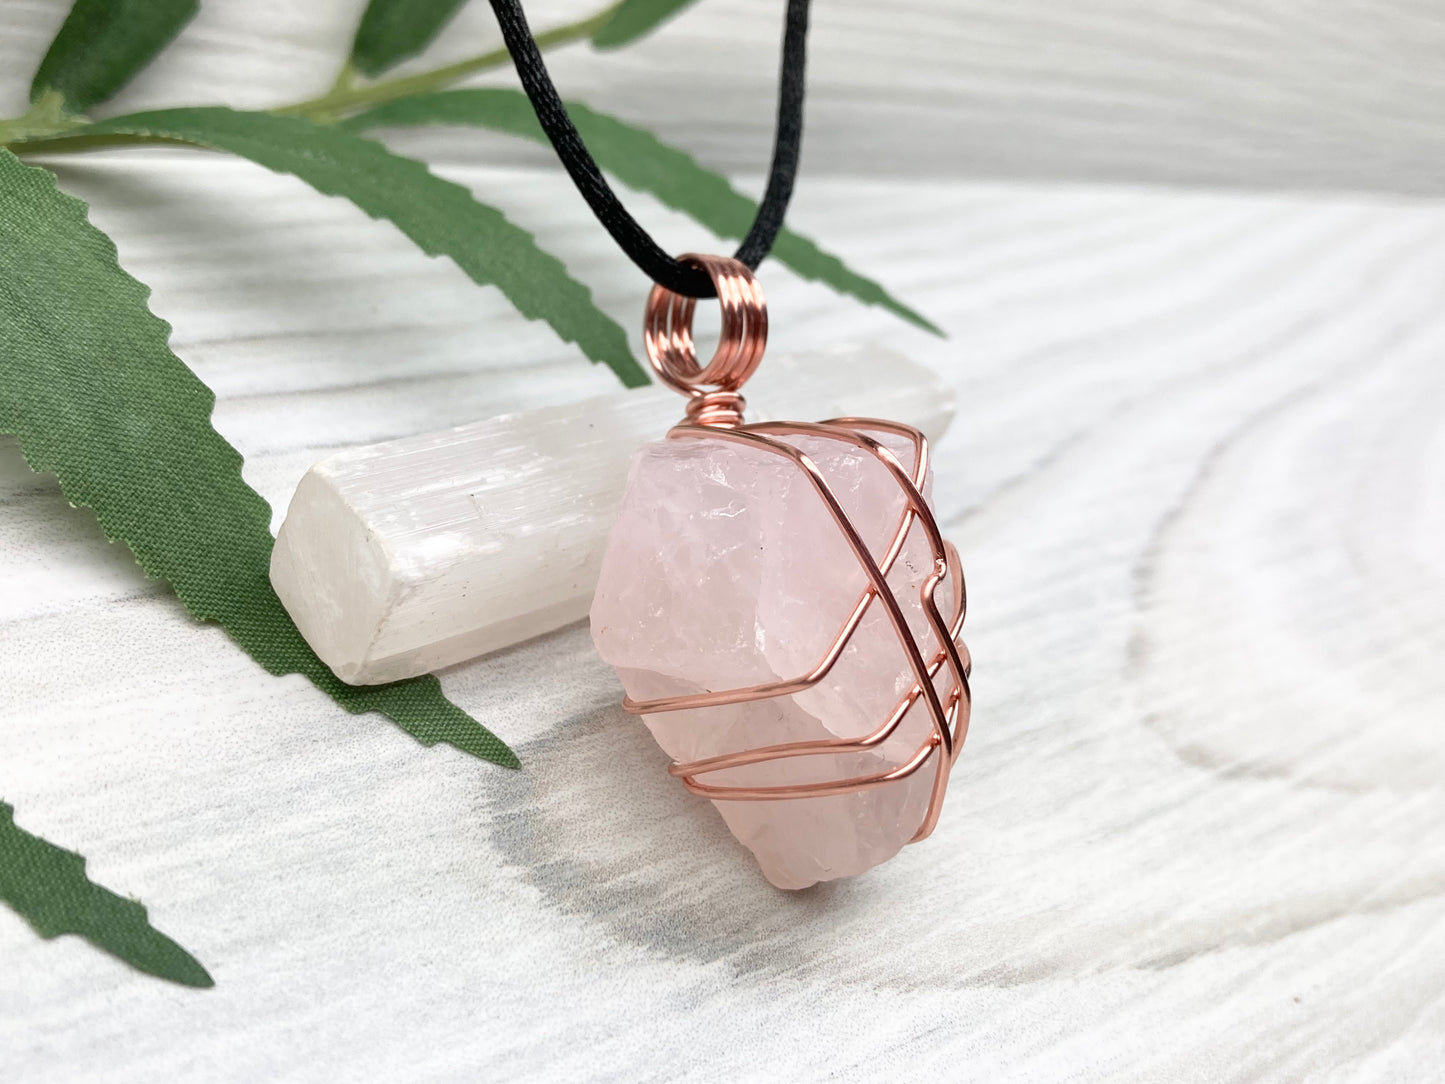 Raw Rose Quartz Necklace. Light Pink Crystal Wrapped With Copper Wire. Comes On A Black Chain. Capricorn Zodiac Stone Jewelry. New Age Boho Style.